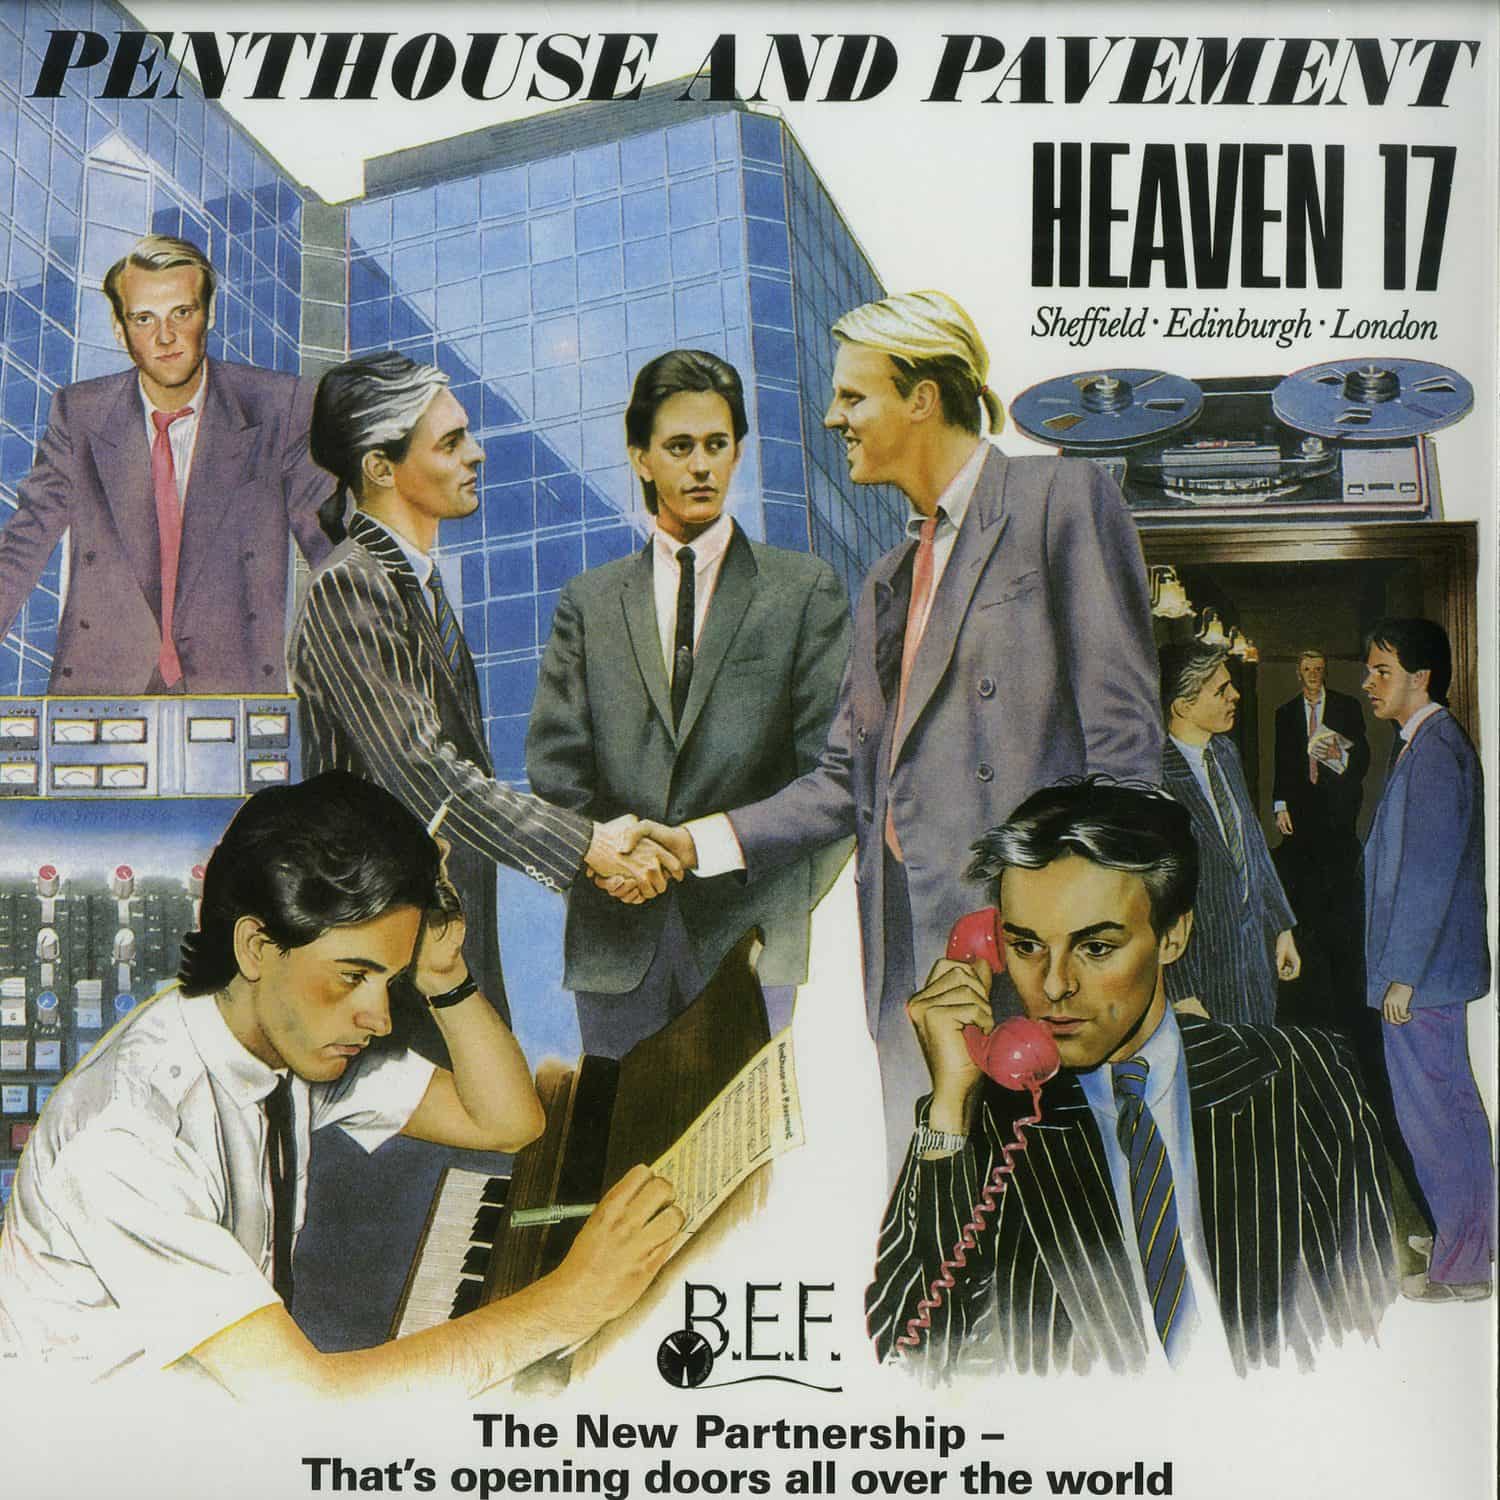 Heaven 17 - PENTHOUSE AND PAVEMENT 